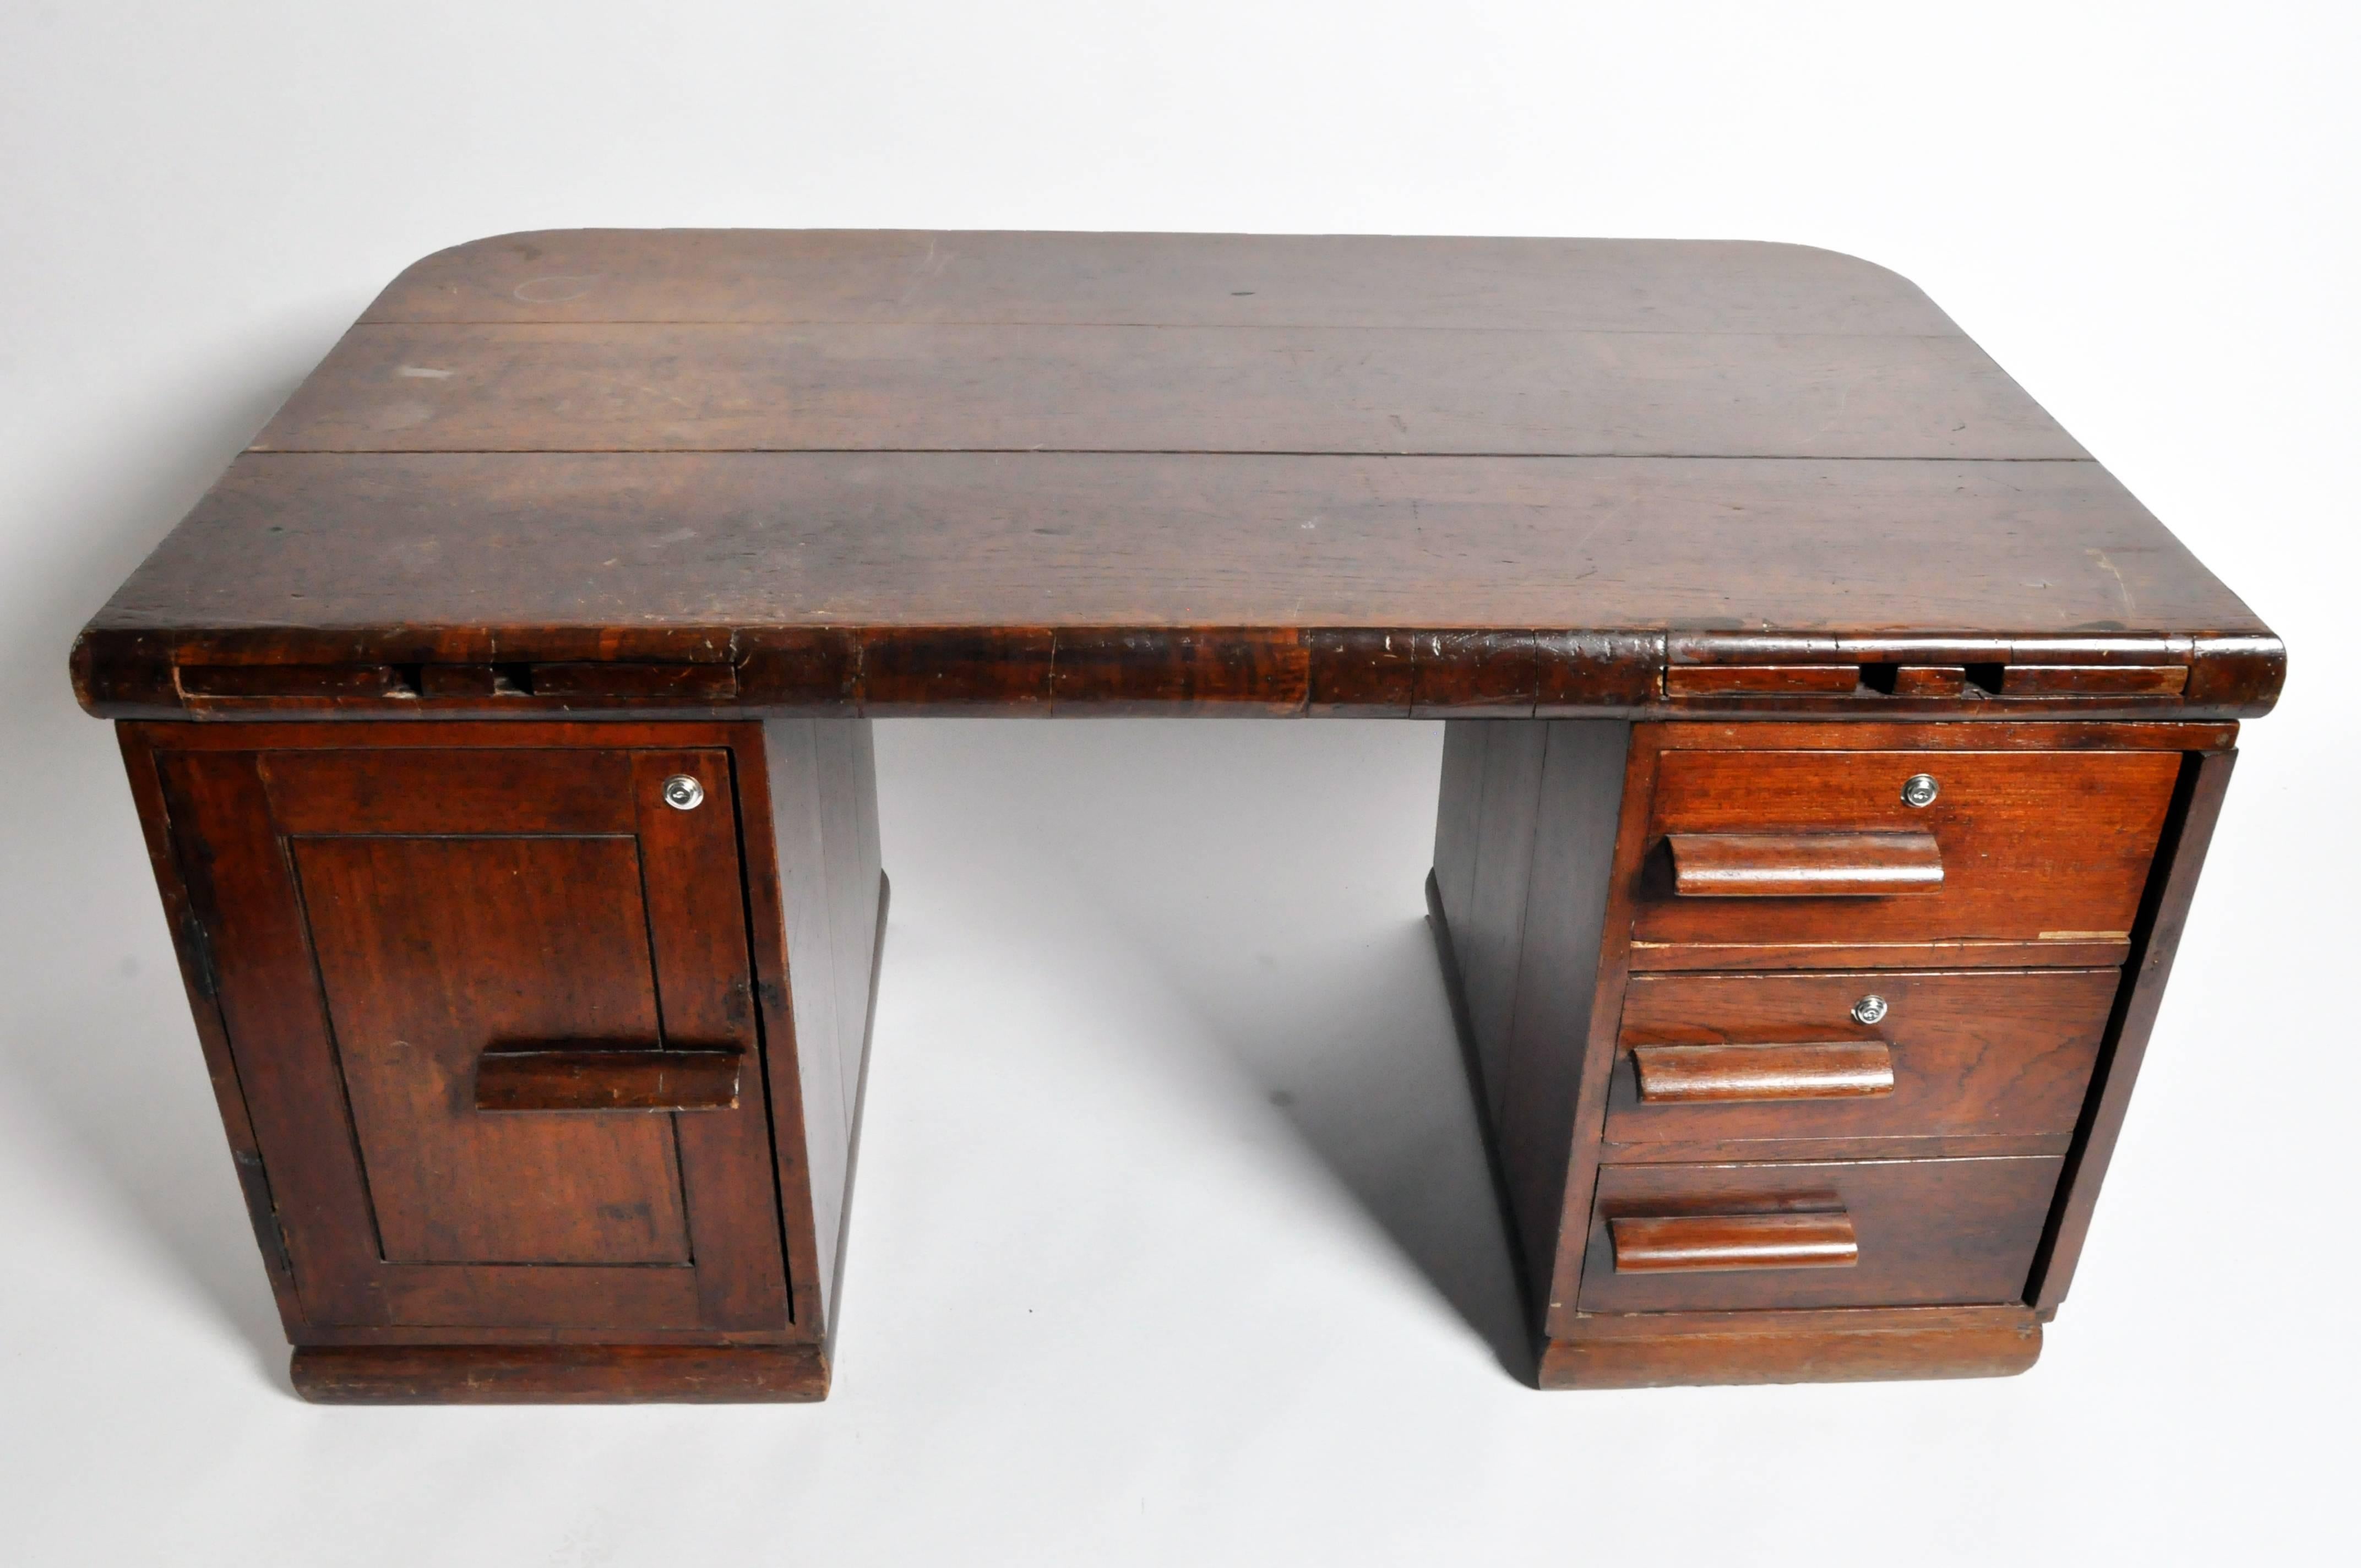 Hailing from Rangoon Burma, this handsome partners desk features a unique combination of British Colonial and Art Deco design elements. Whether used in a home or office space, it lends a smart, vintage beauty.